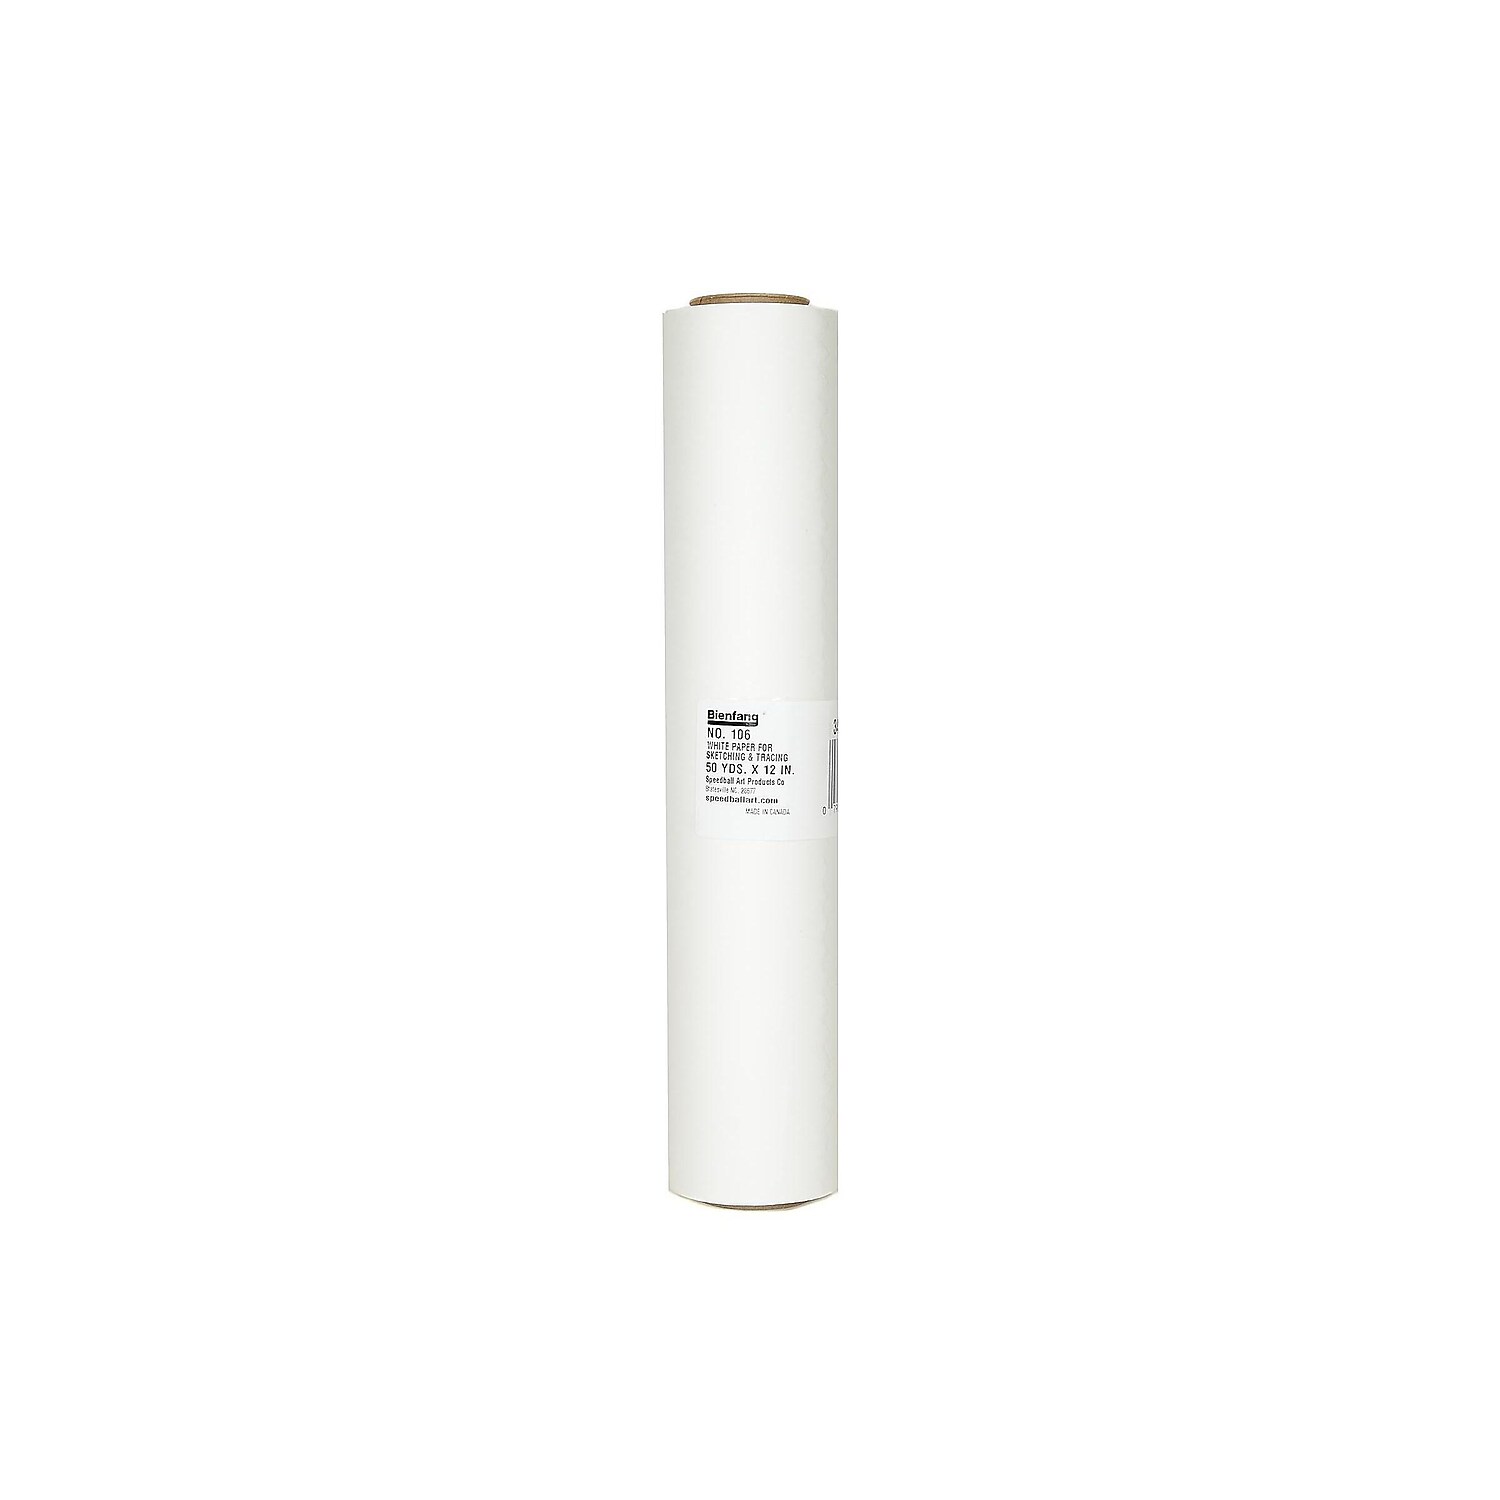 Bienfang Sketching & Tracing Paper Roll 12W x 150'L White 12176